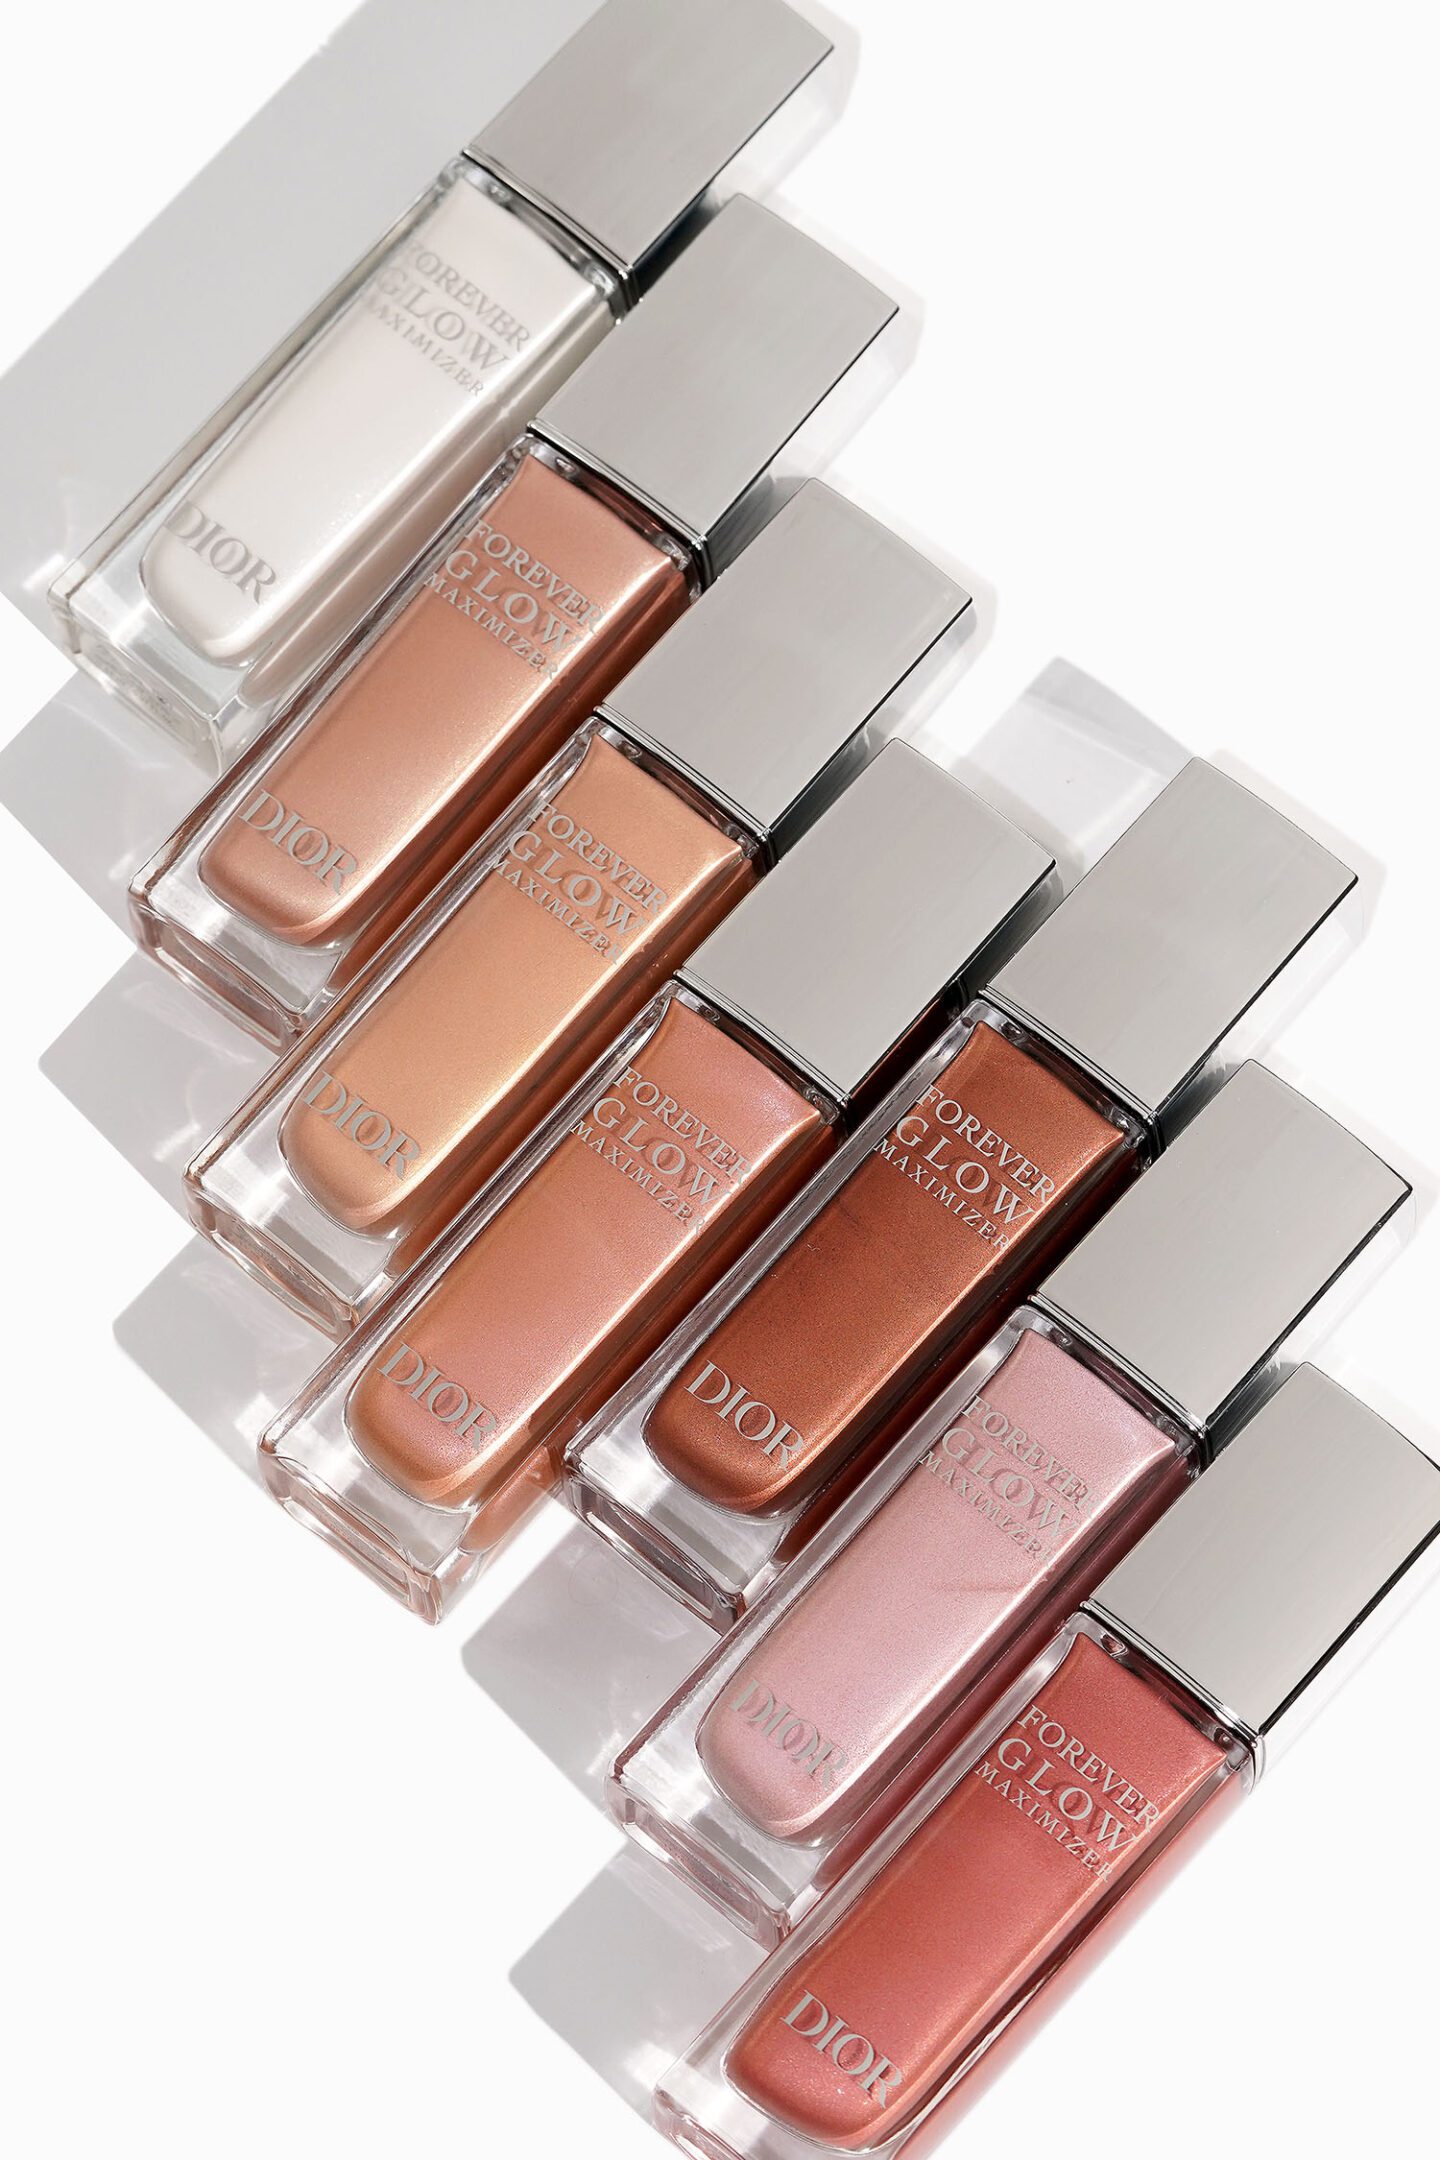 Dior Forever Glow Maximizer Longwear Liquid Highlighter swatches